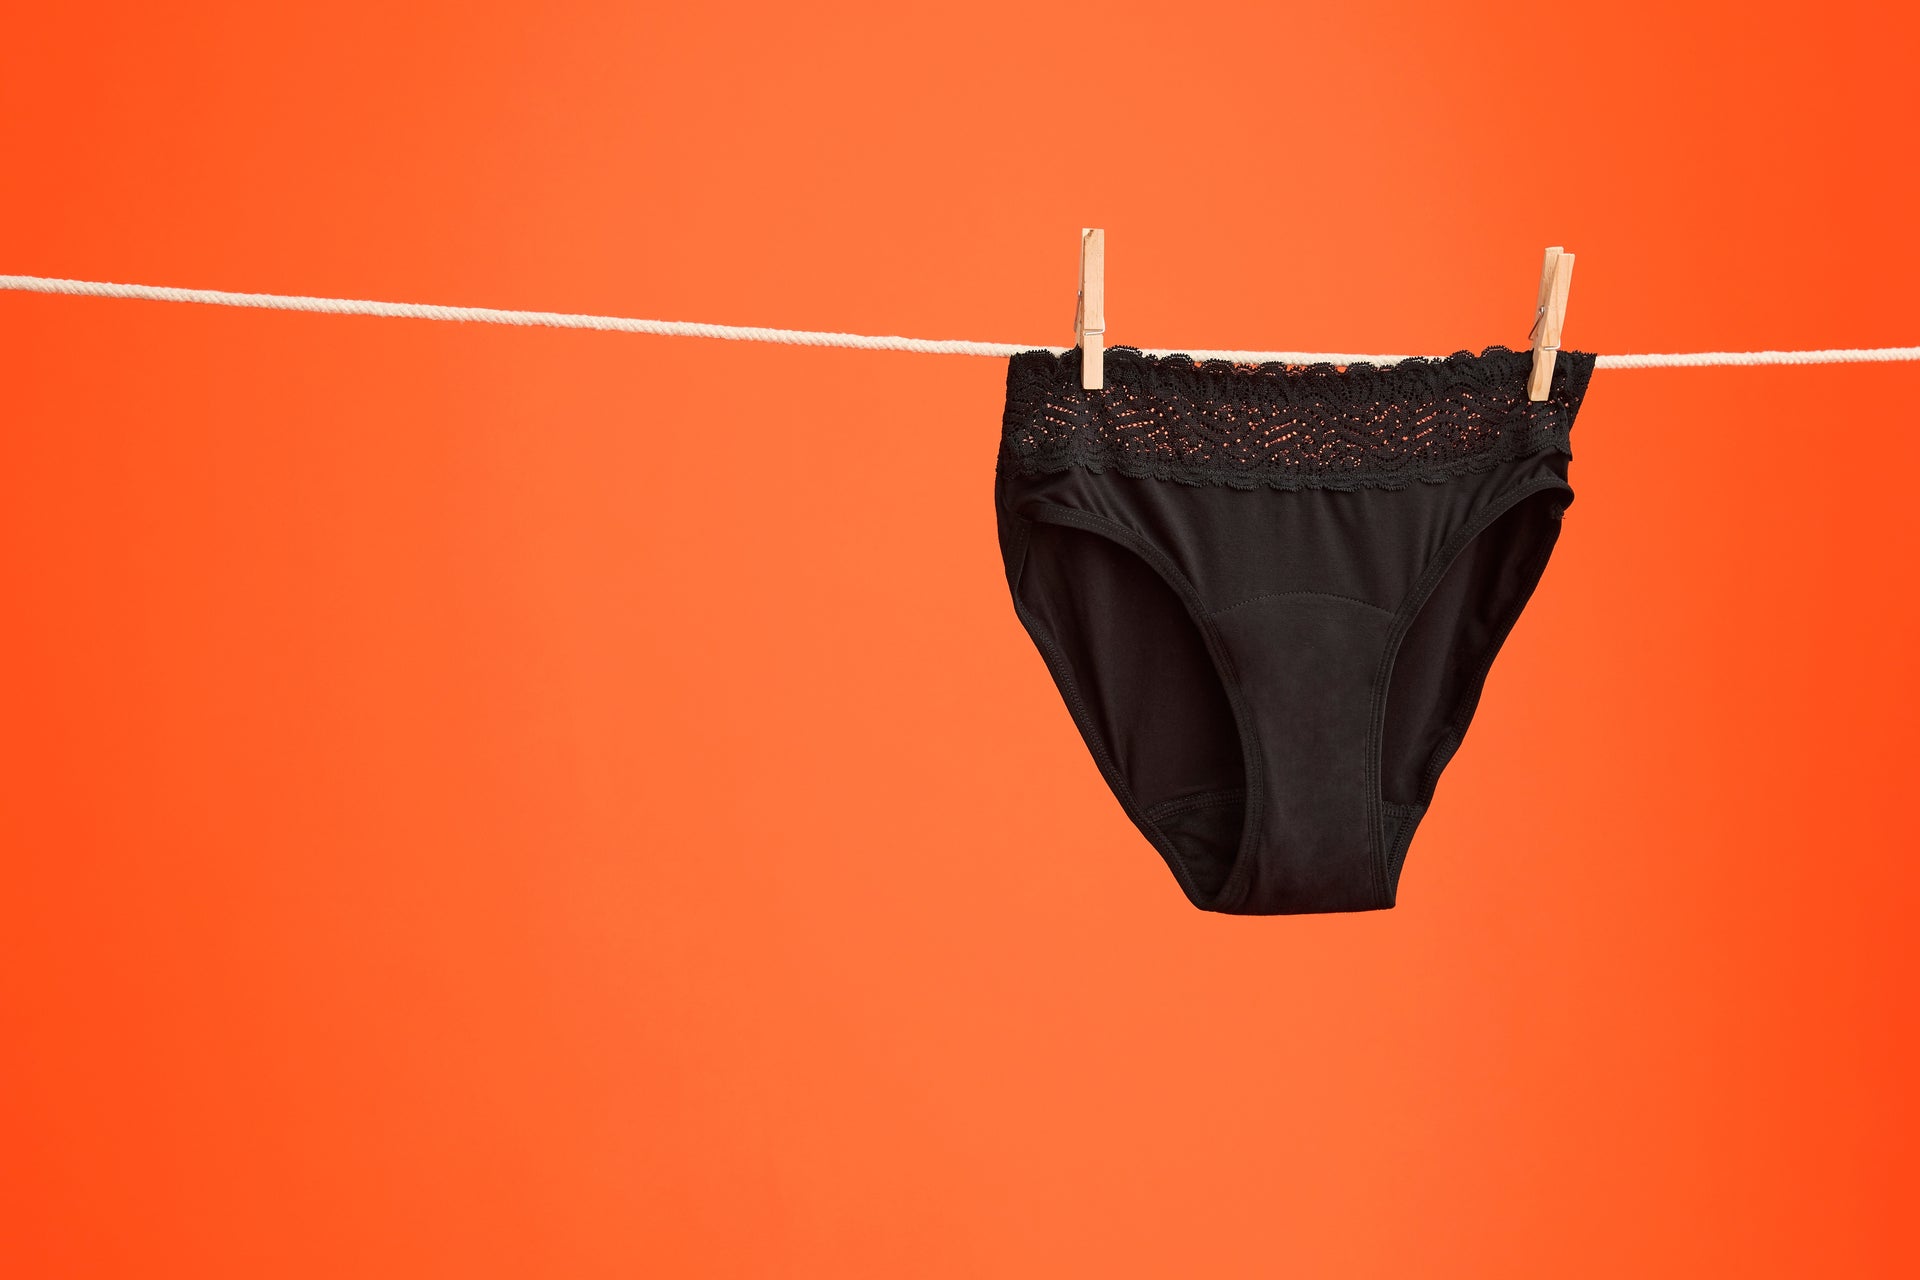 Period pants: the best period pants to buy UK 2019